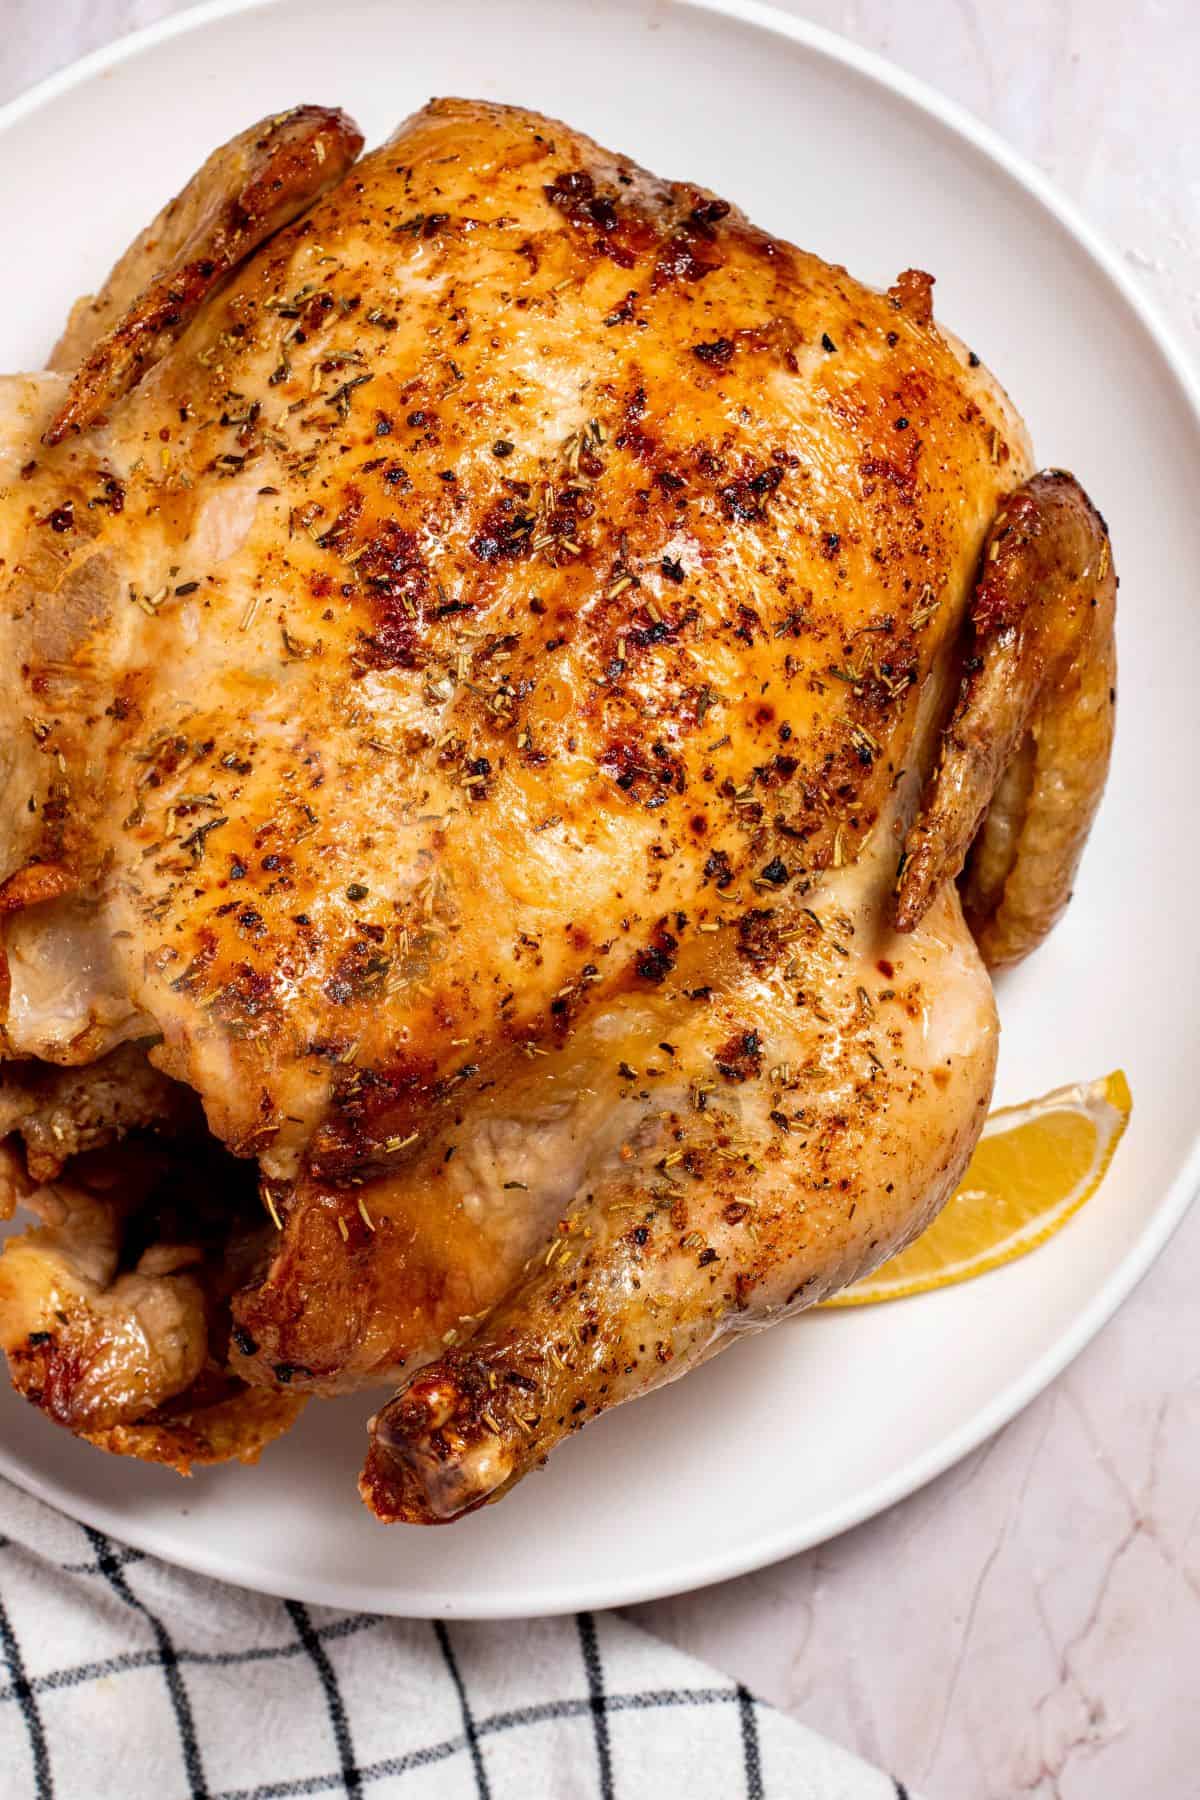 https://drdavinahseats.com/wp-content/uploads/2022/02/Air-Fryer-Simple-Roasted-Whole-Chicken-final-product.jpg